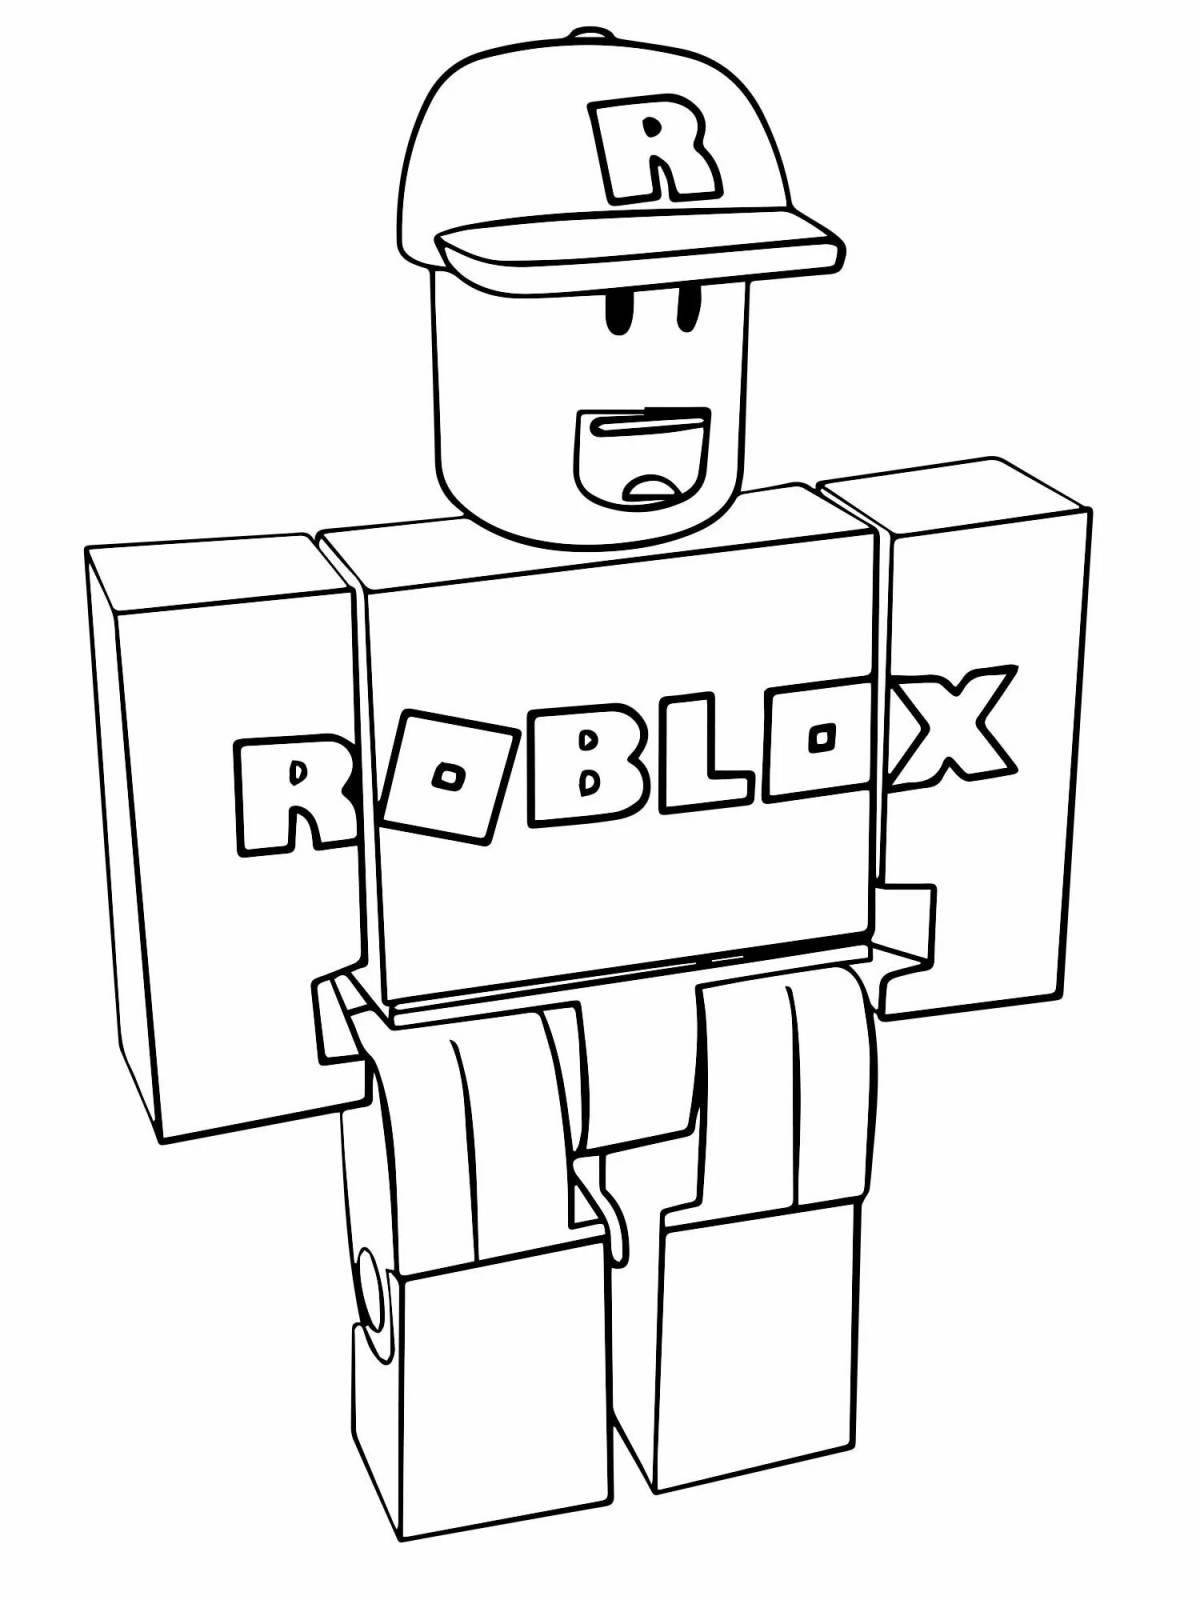 Colorful roblox print coloring page